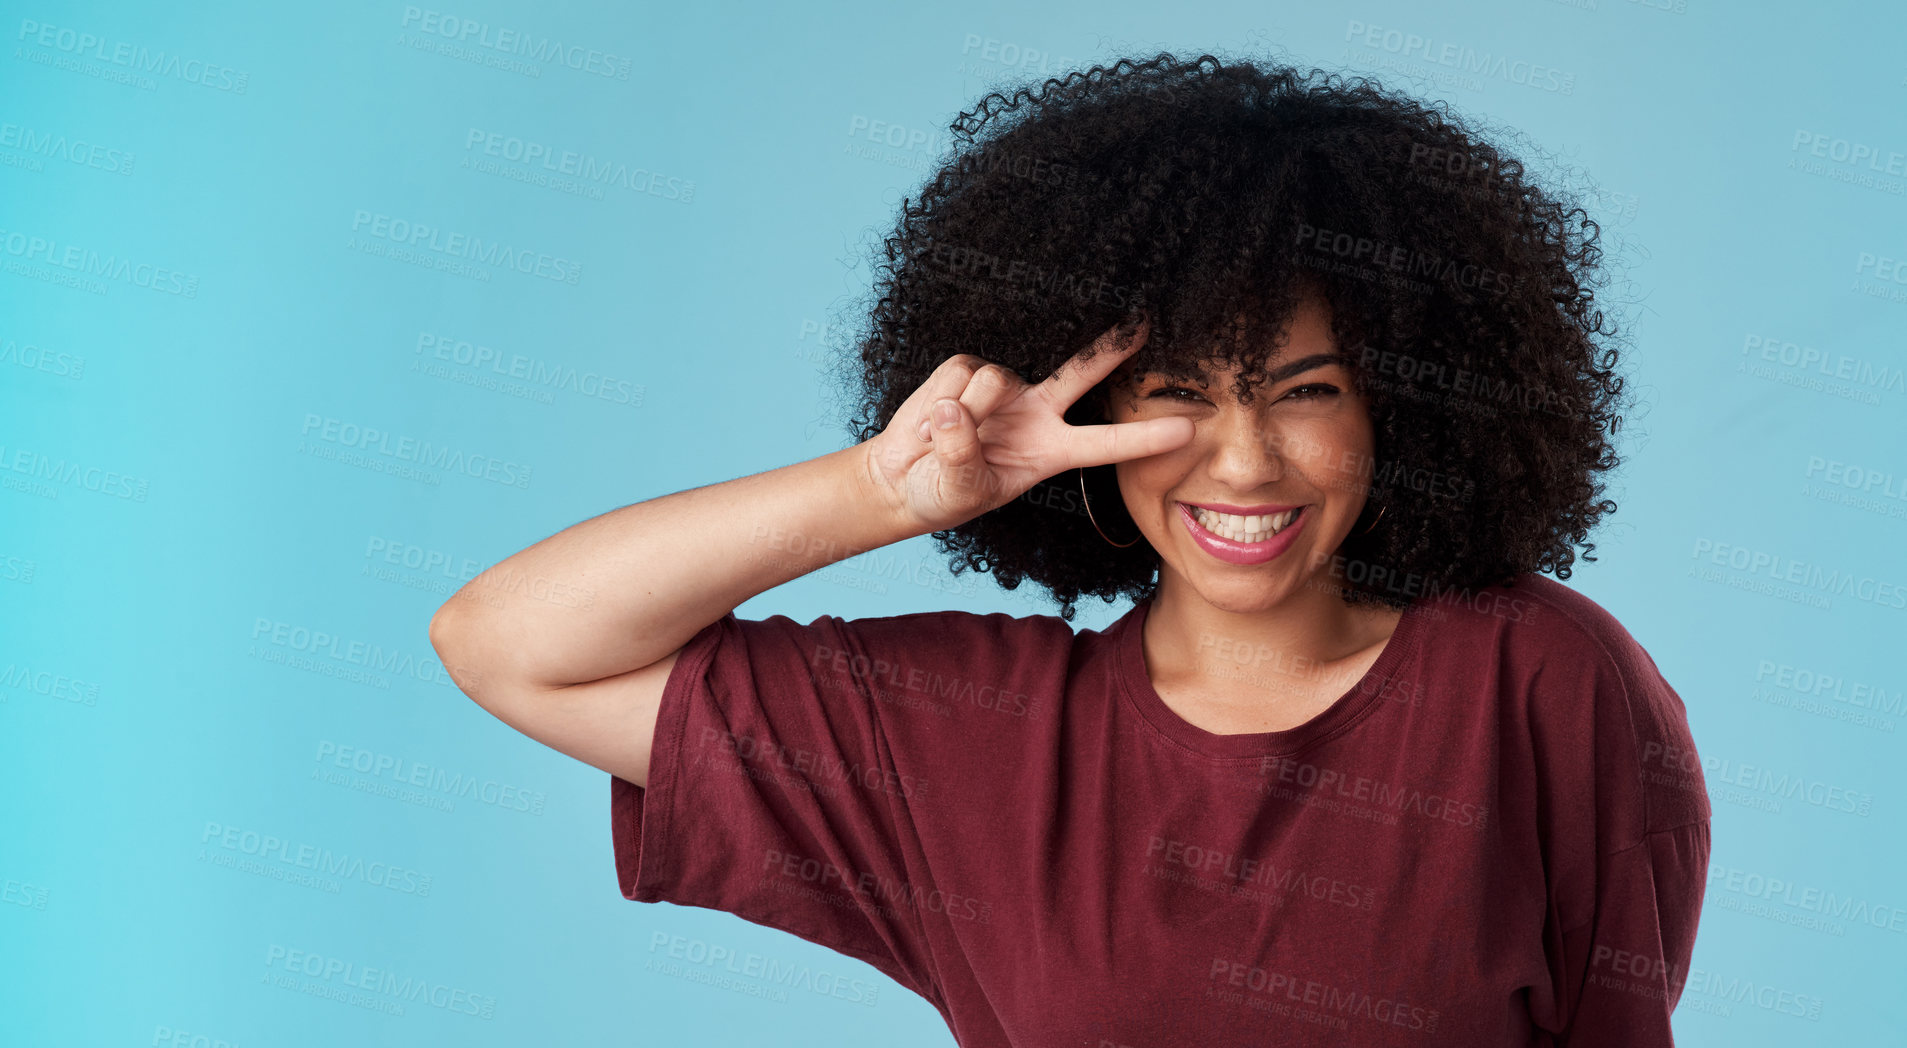 Buy stock photo Studio shot of an attractive young woman making a peace gesture against a blue background